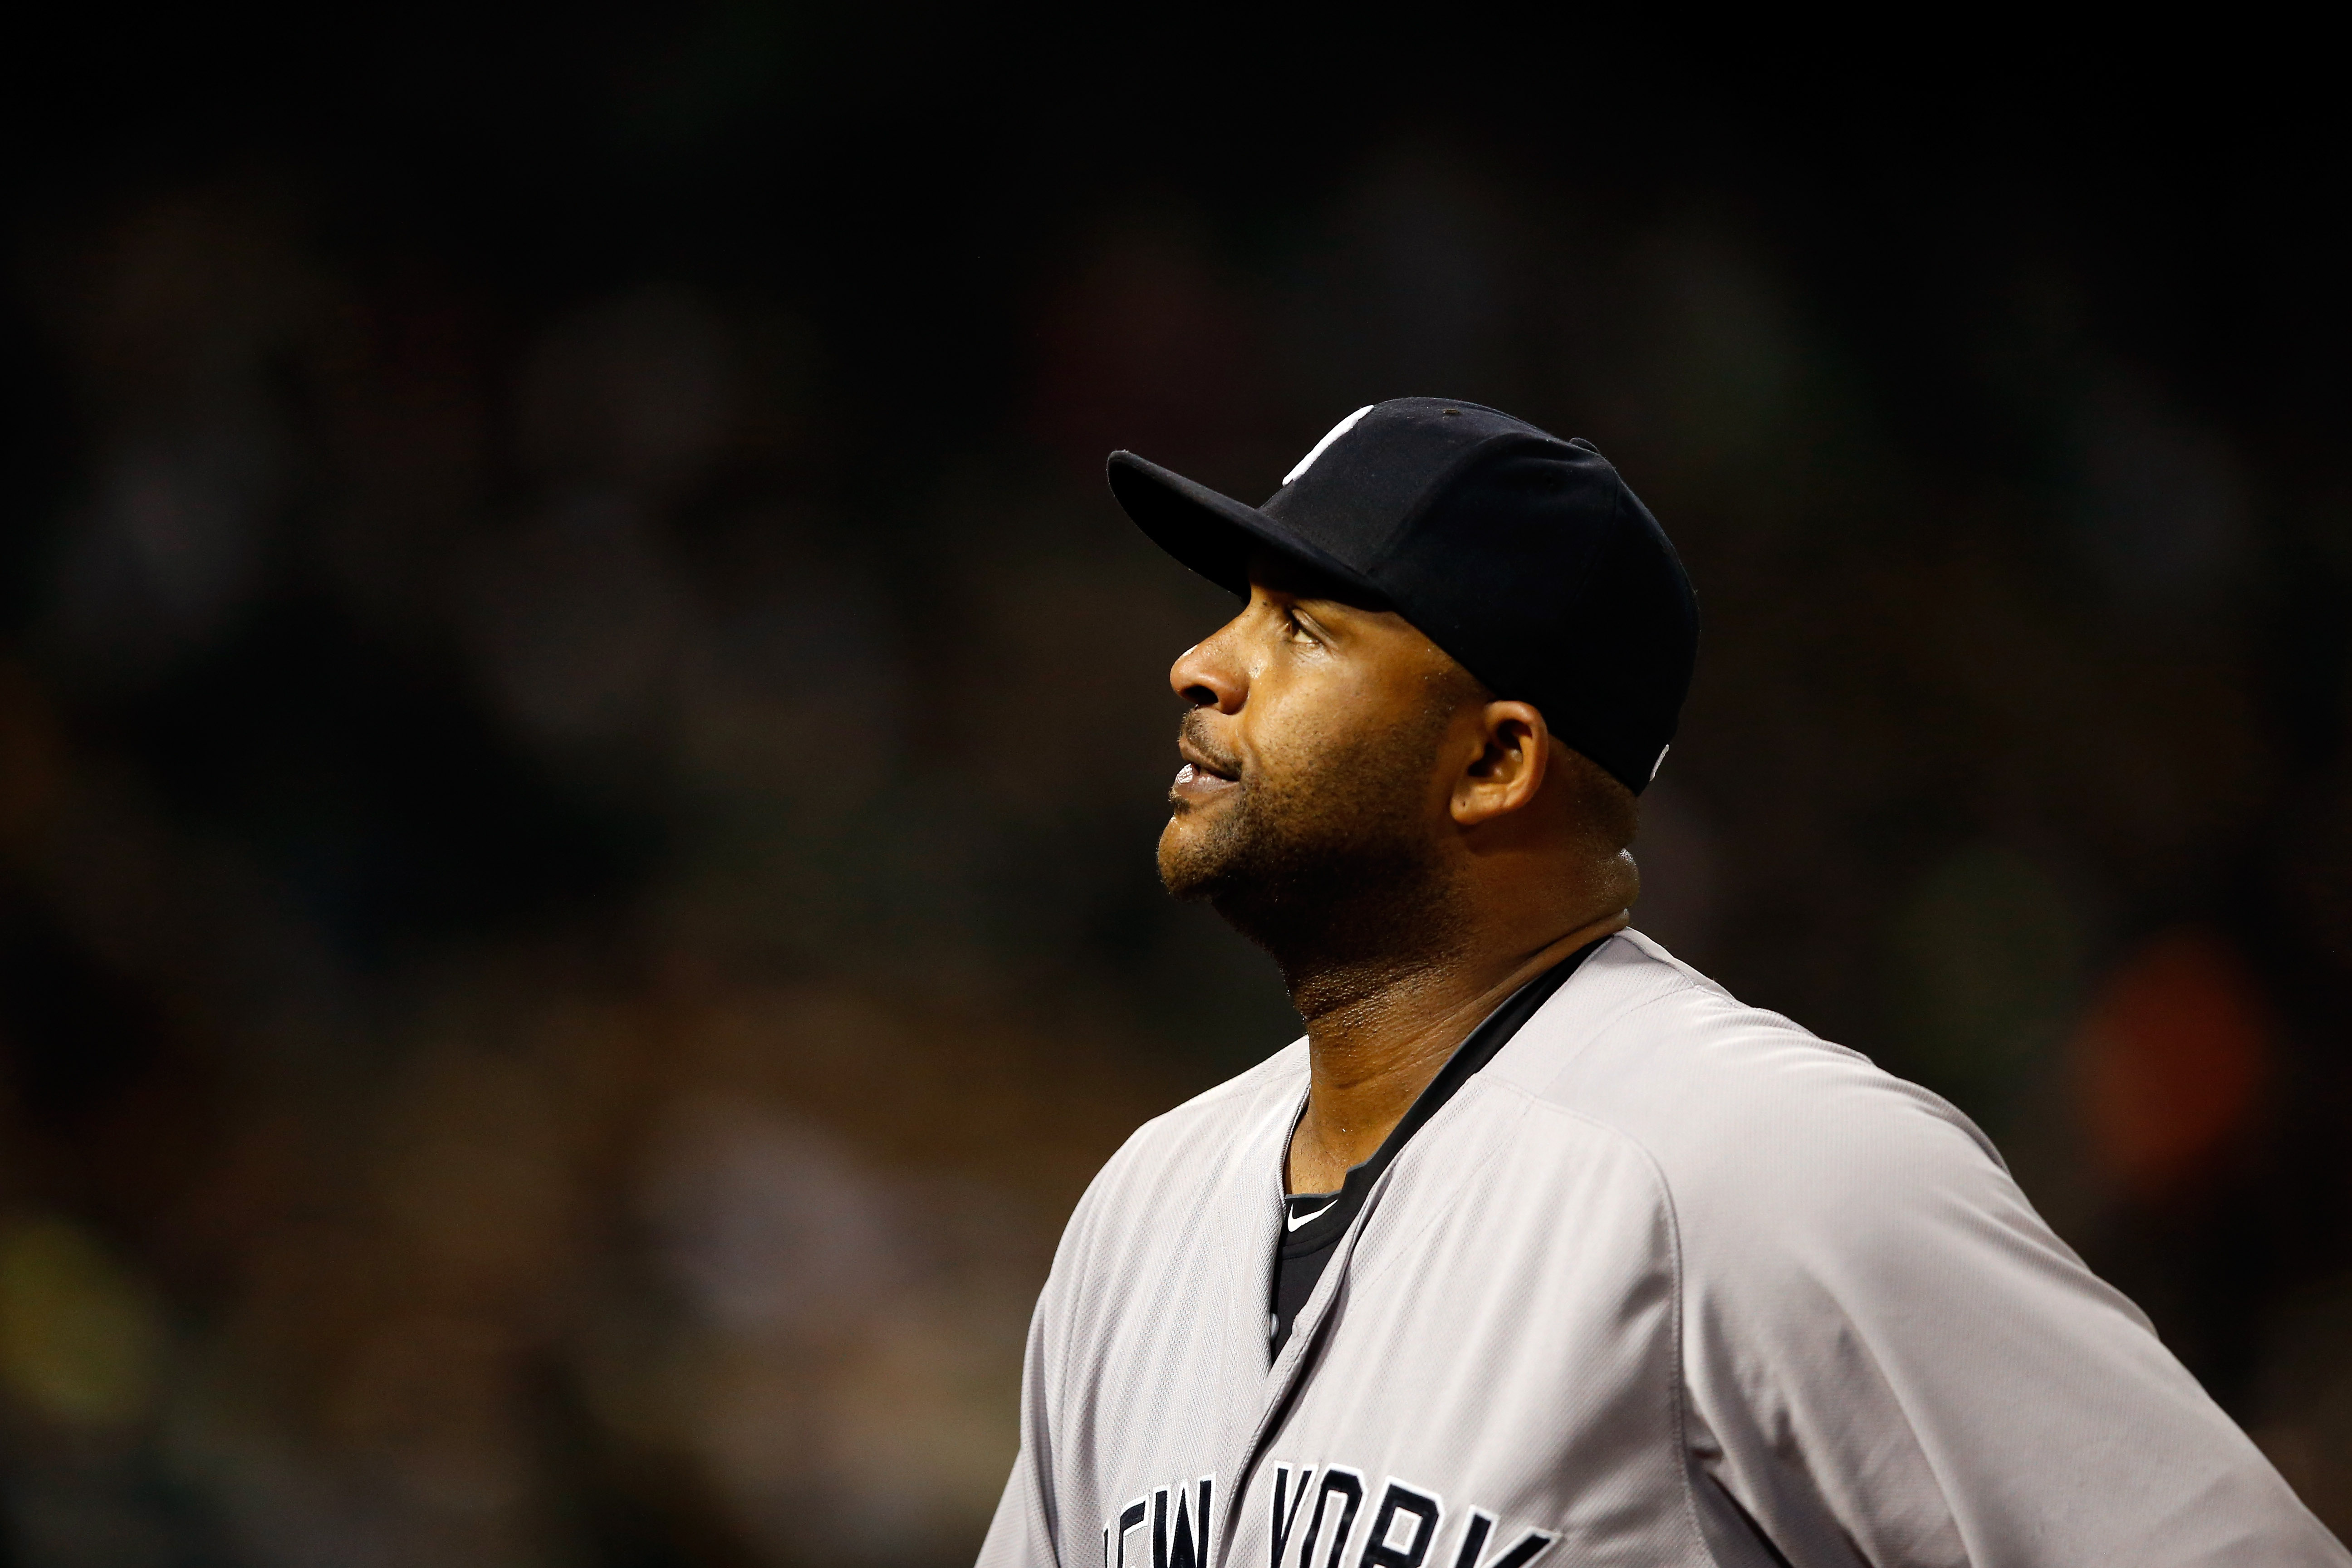 Baseball great CC Sabathia opens up about his alcohol struggles